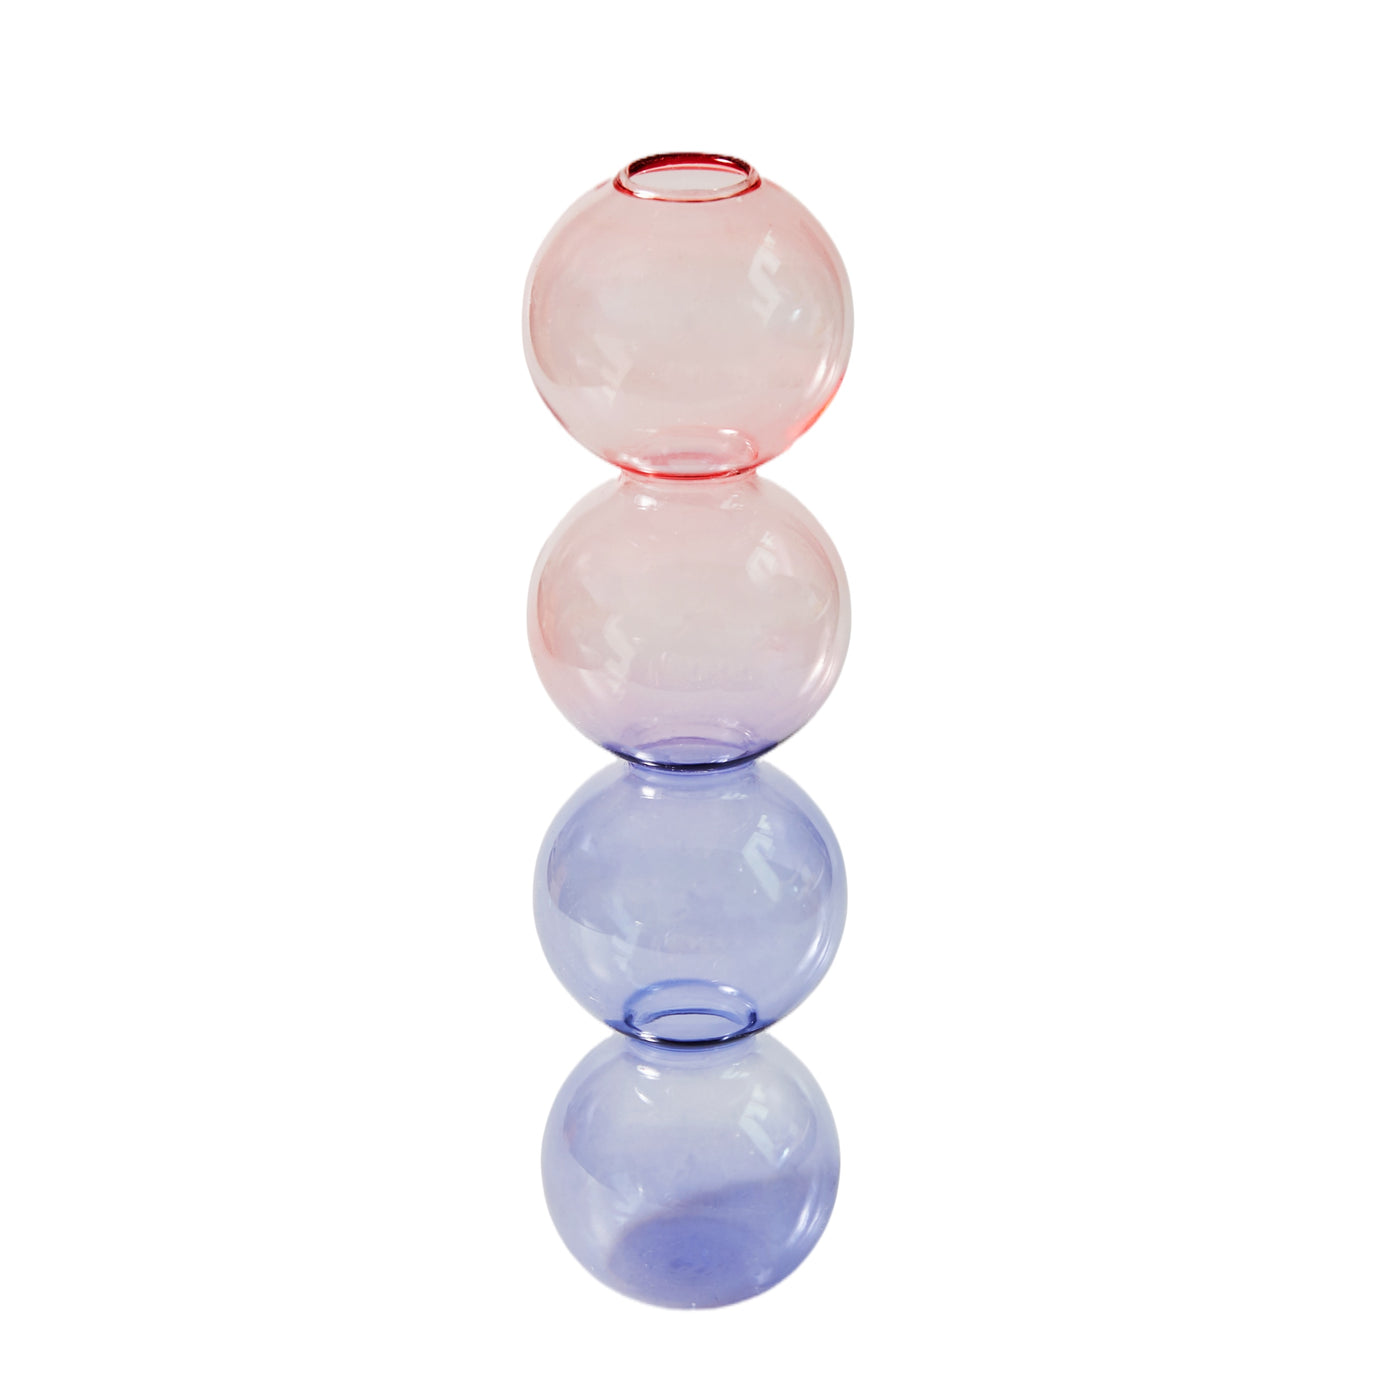 Wavy Bubble Glass Candlestick Holders Pink and Lilac Candle Candle Holders